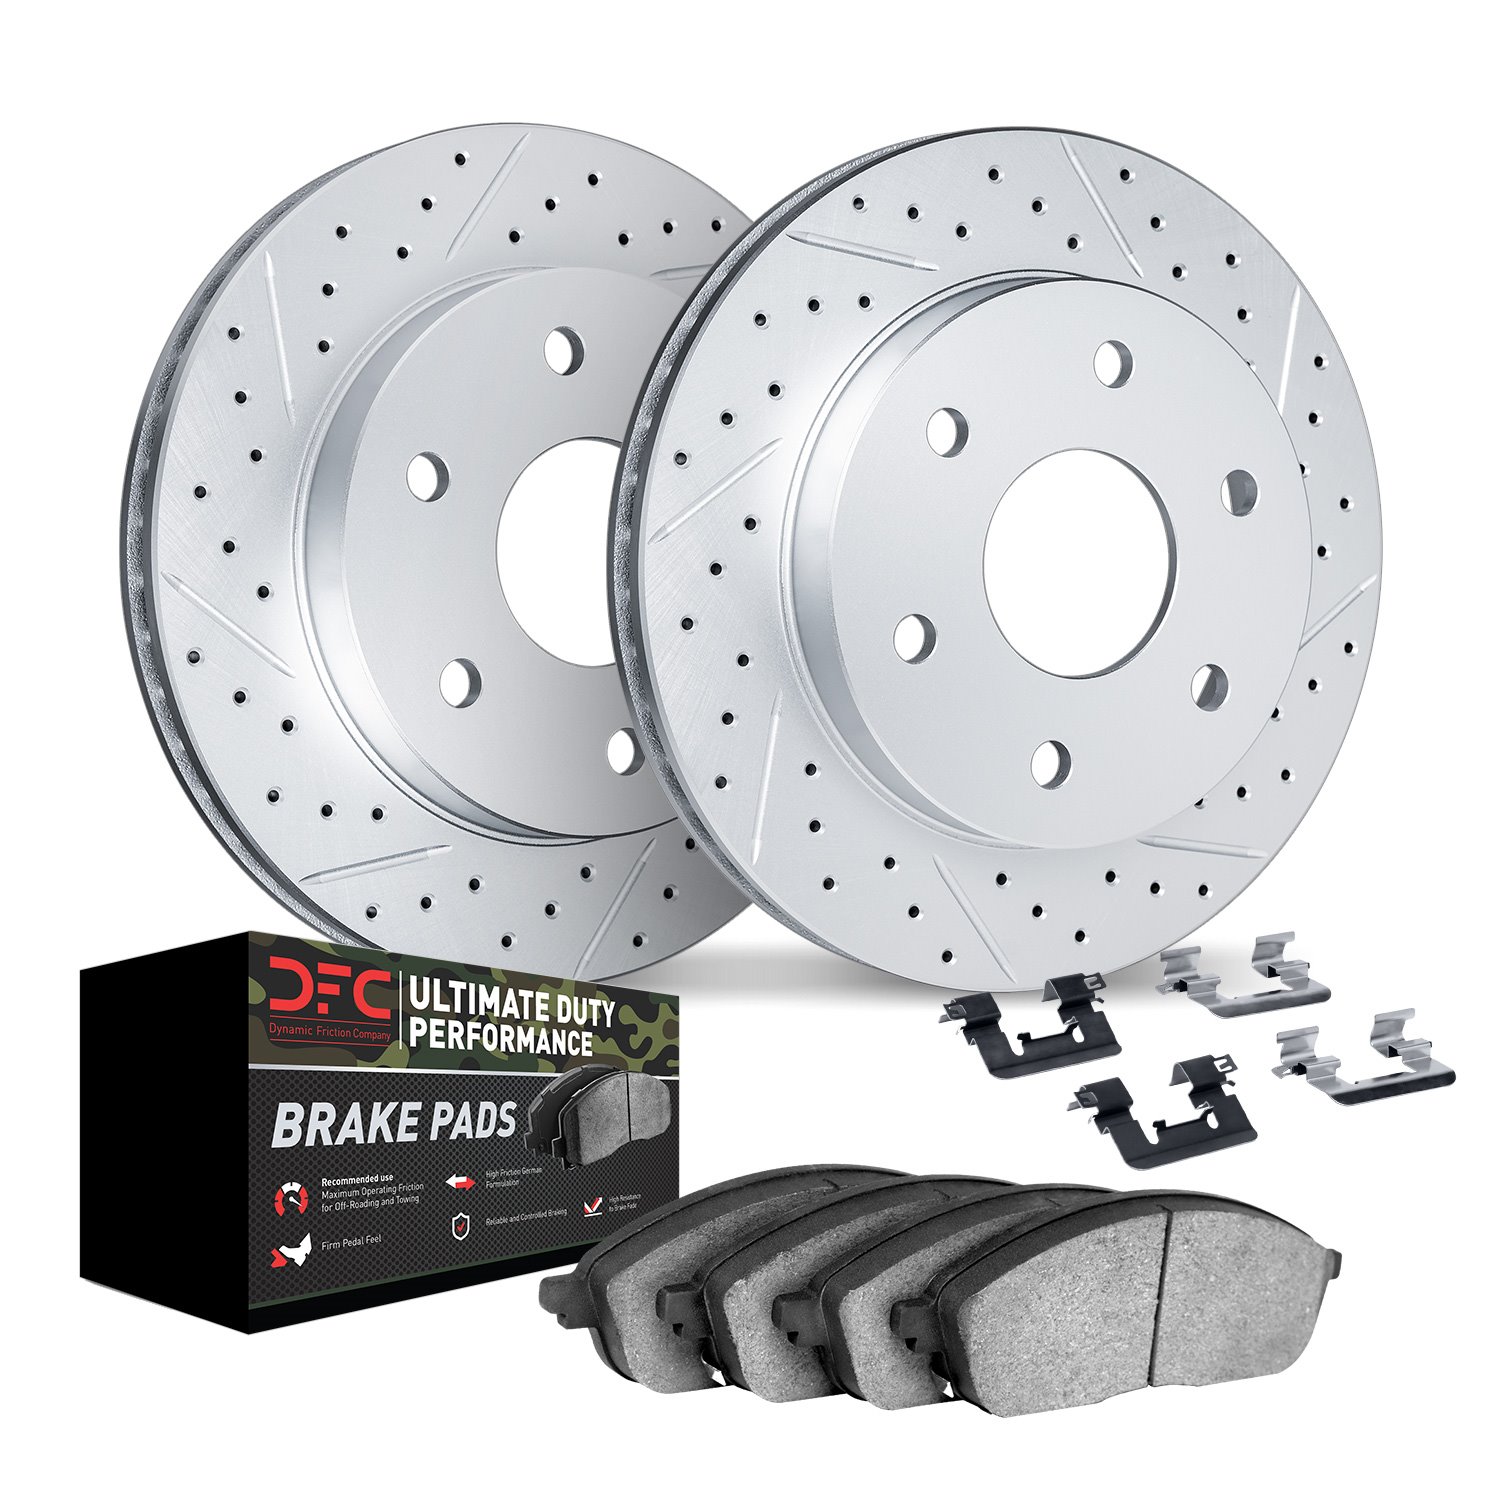 2412-67009 Geoperformance Drilled/Slotted Brake Rotors with Ultimate-Duty Brake Pads Kit & Hardware, Fits Select Infiniti/Nissan